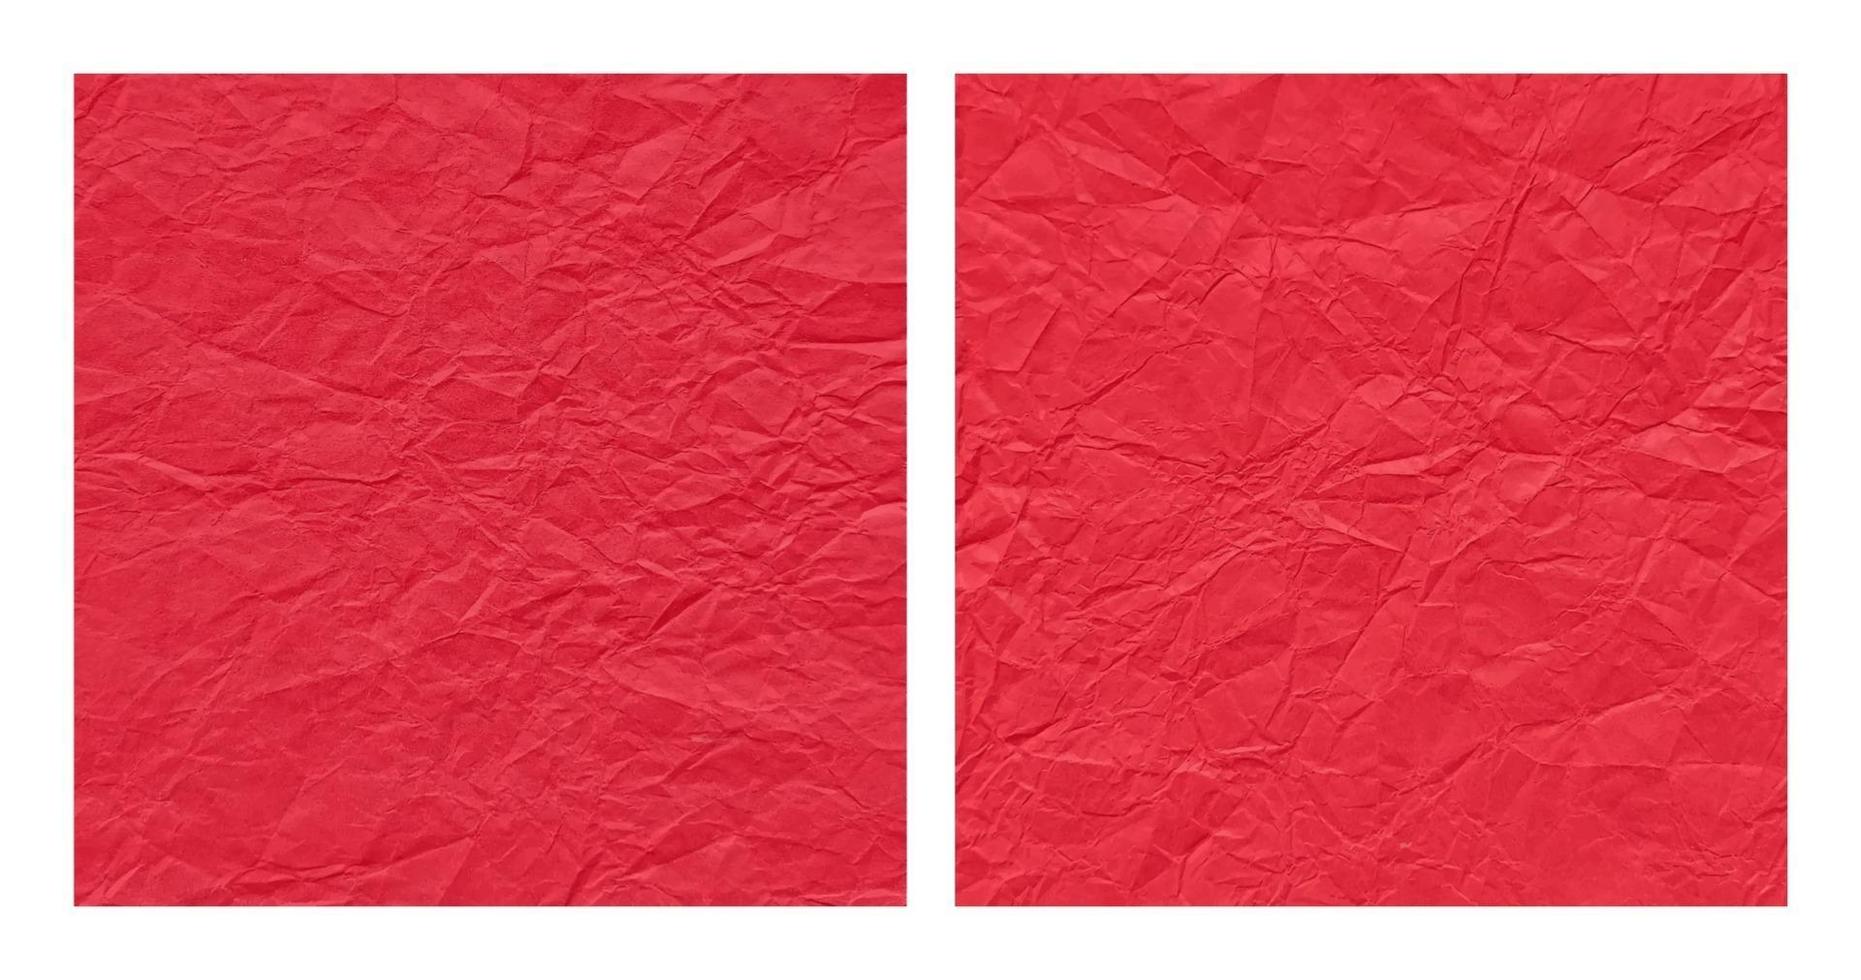 Realistic crumpled red paper texture background set vector